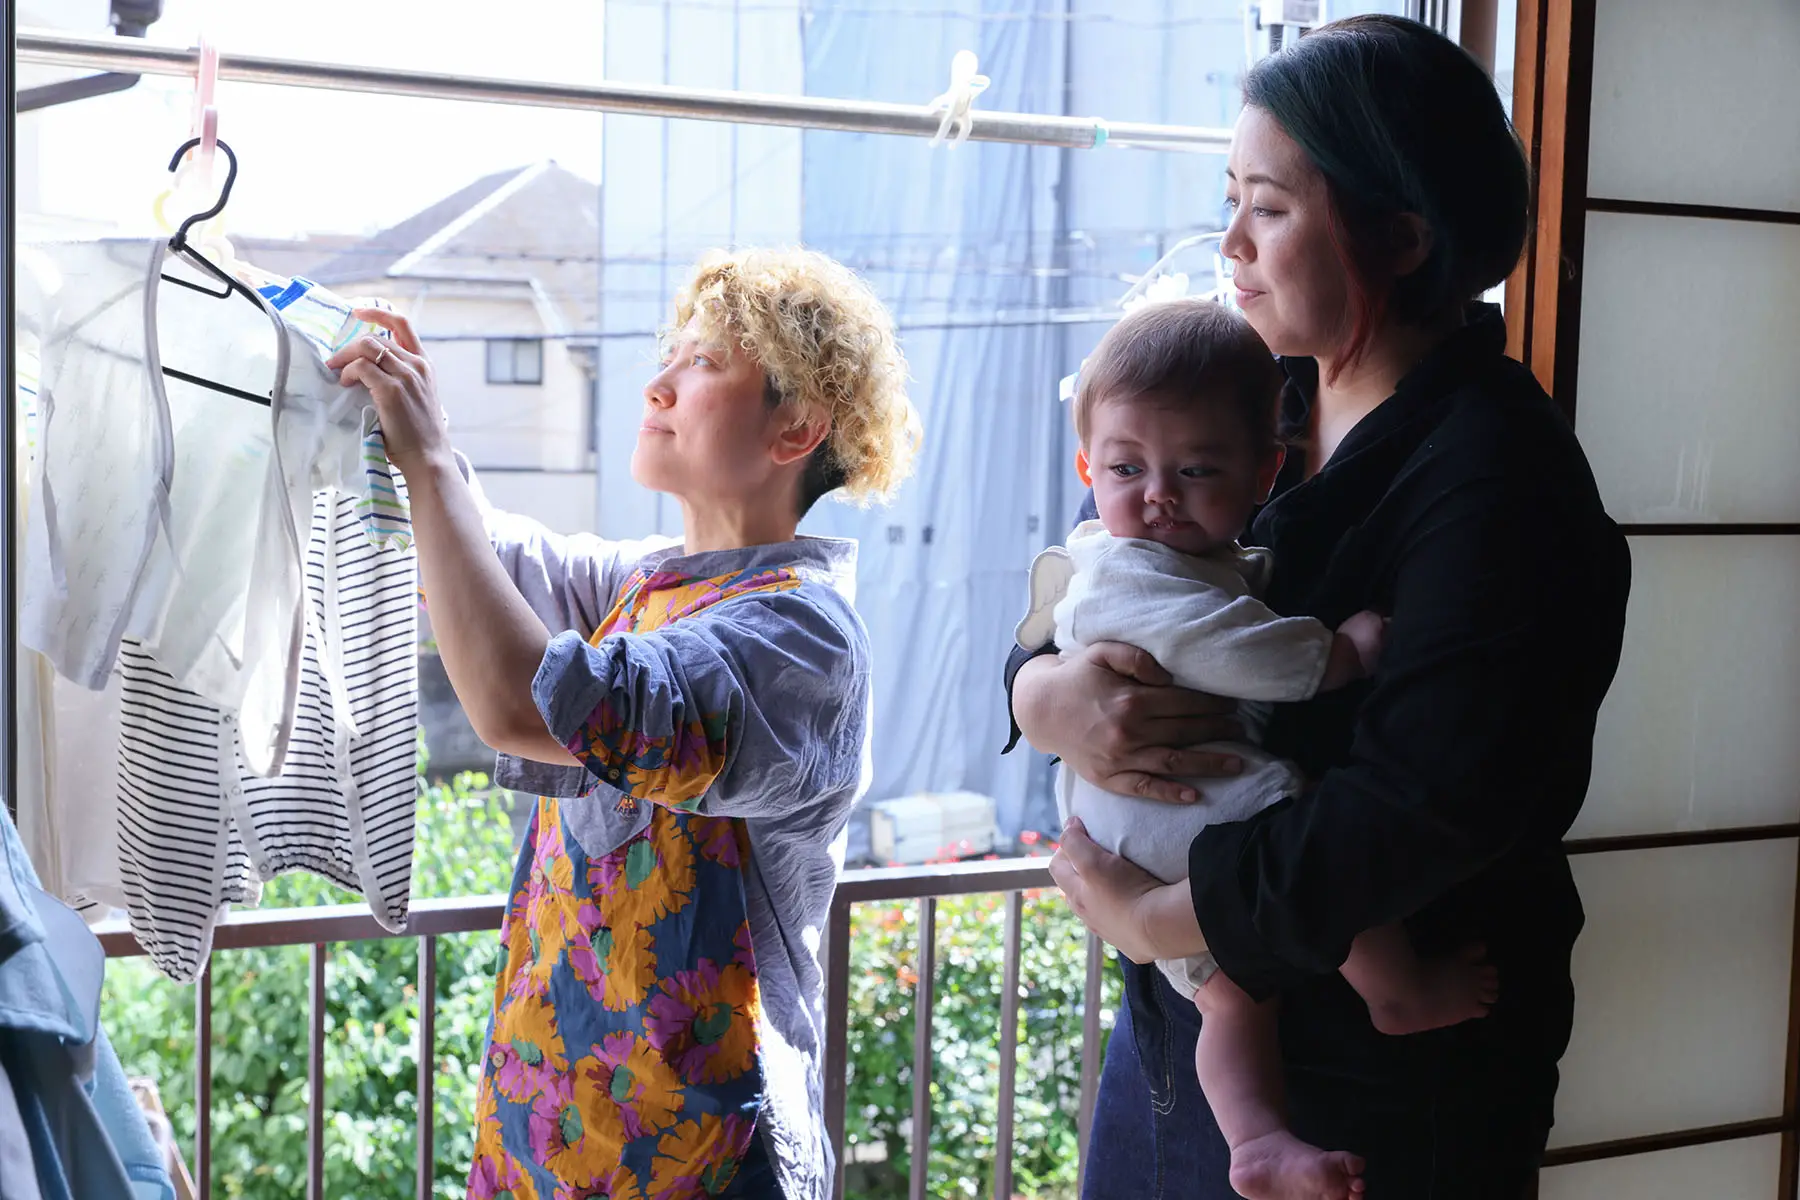 LGBTQ couple hanging laundry on the balcony, one is holding a baby.